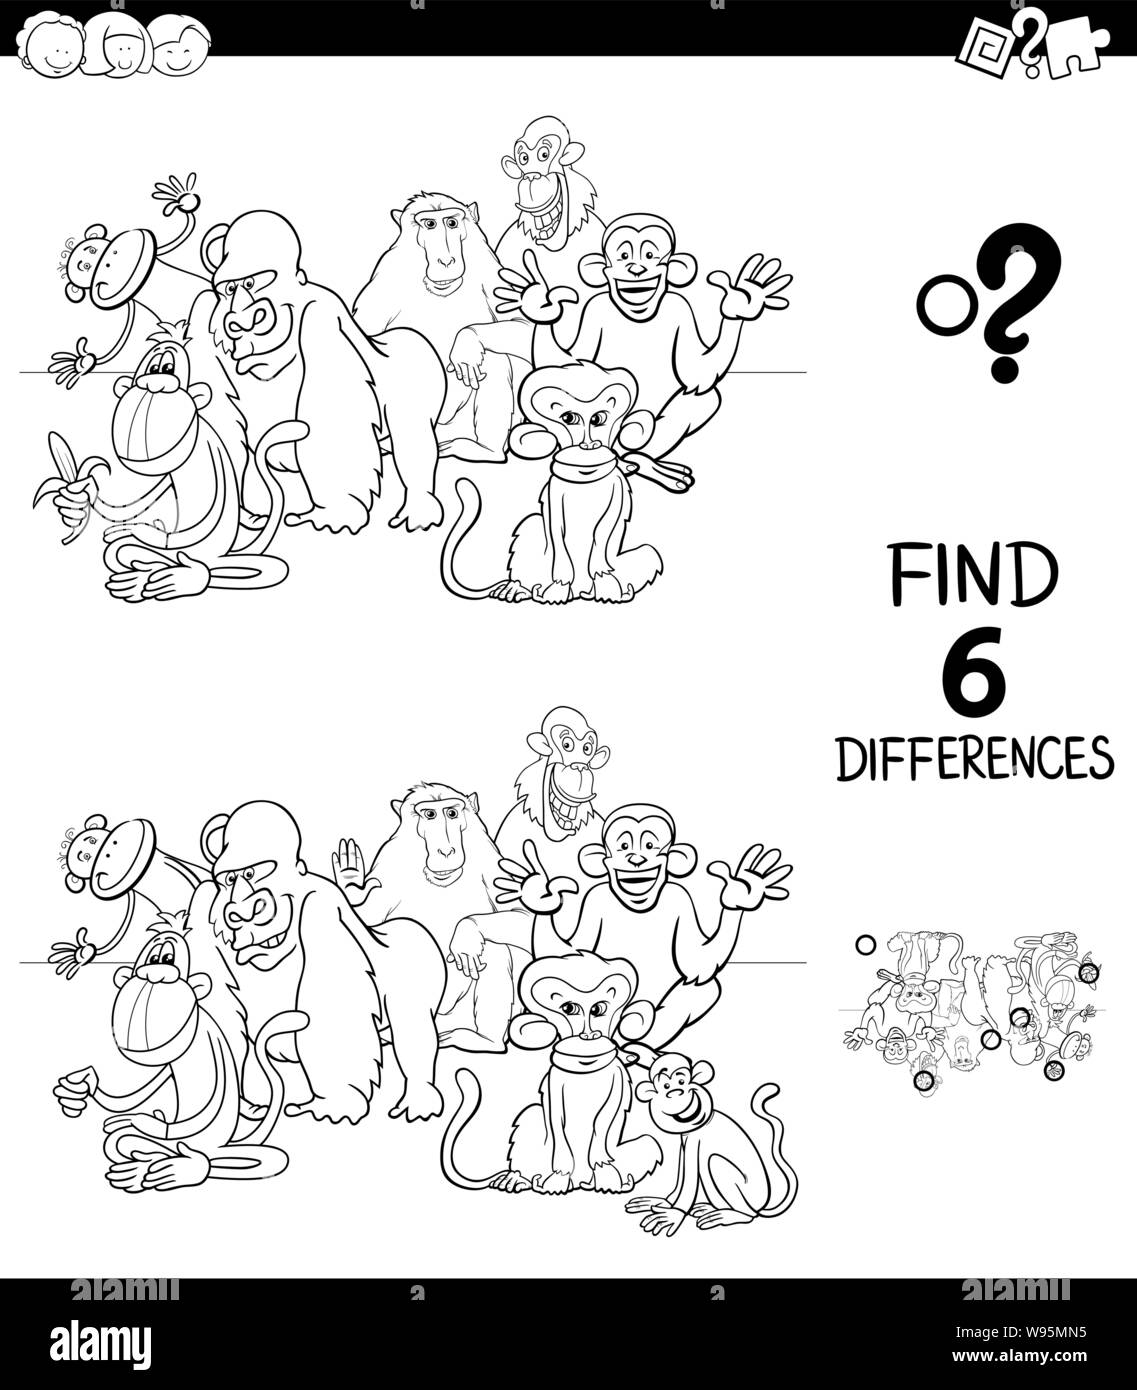 Black and White Cartoon Illustration of Finding Six Differences Between Pictures Educational Game for Children with Monkeys Animal Characters Coloring Stock Vector